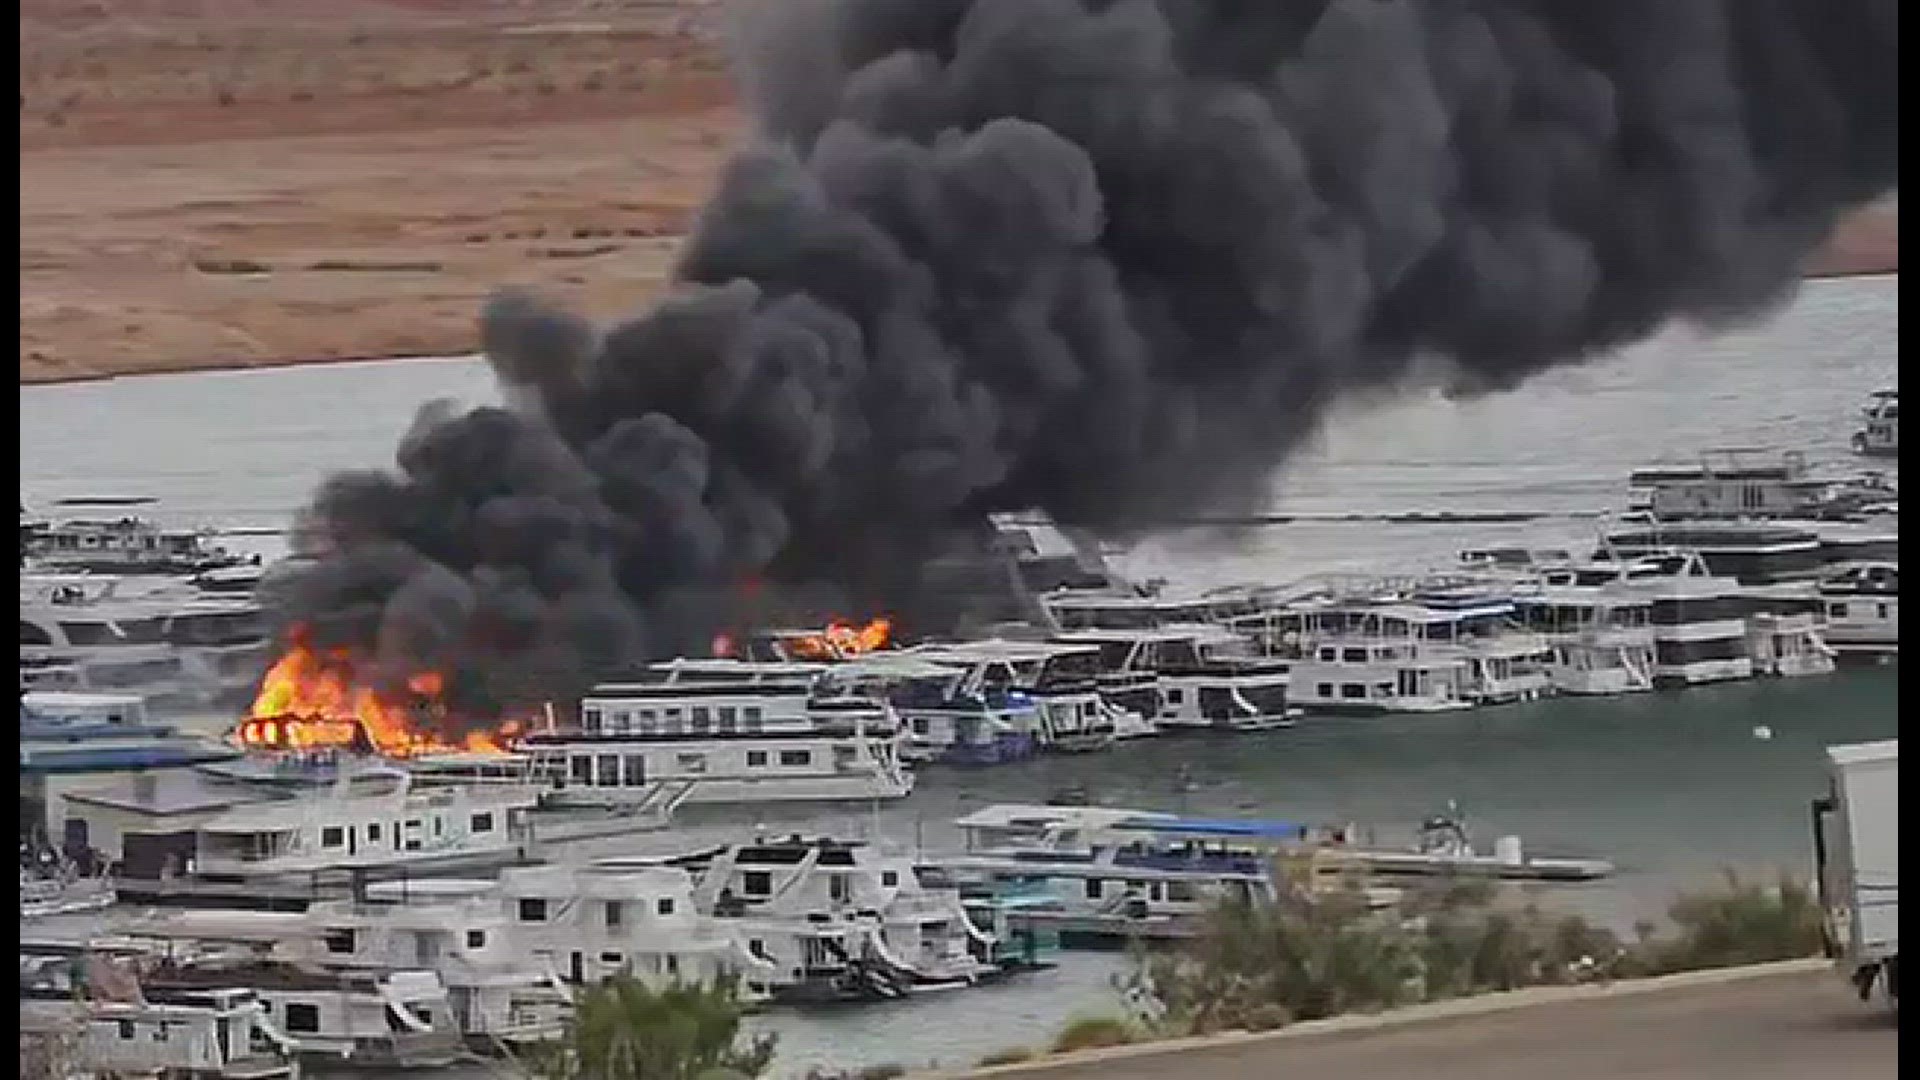 Boats catch fire at Lake Powell